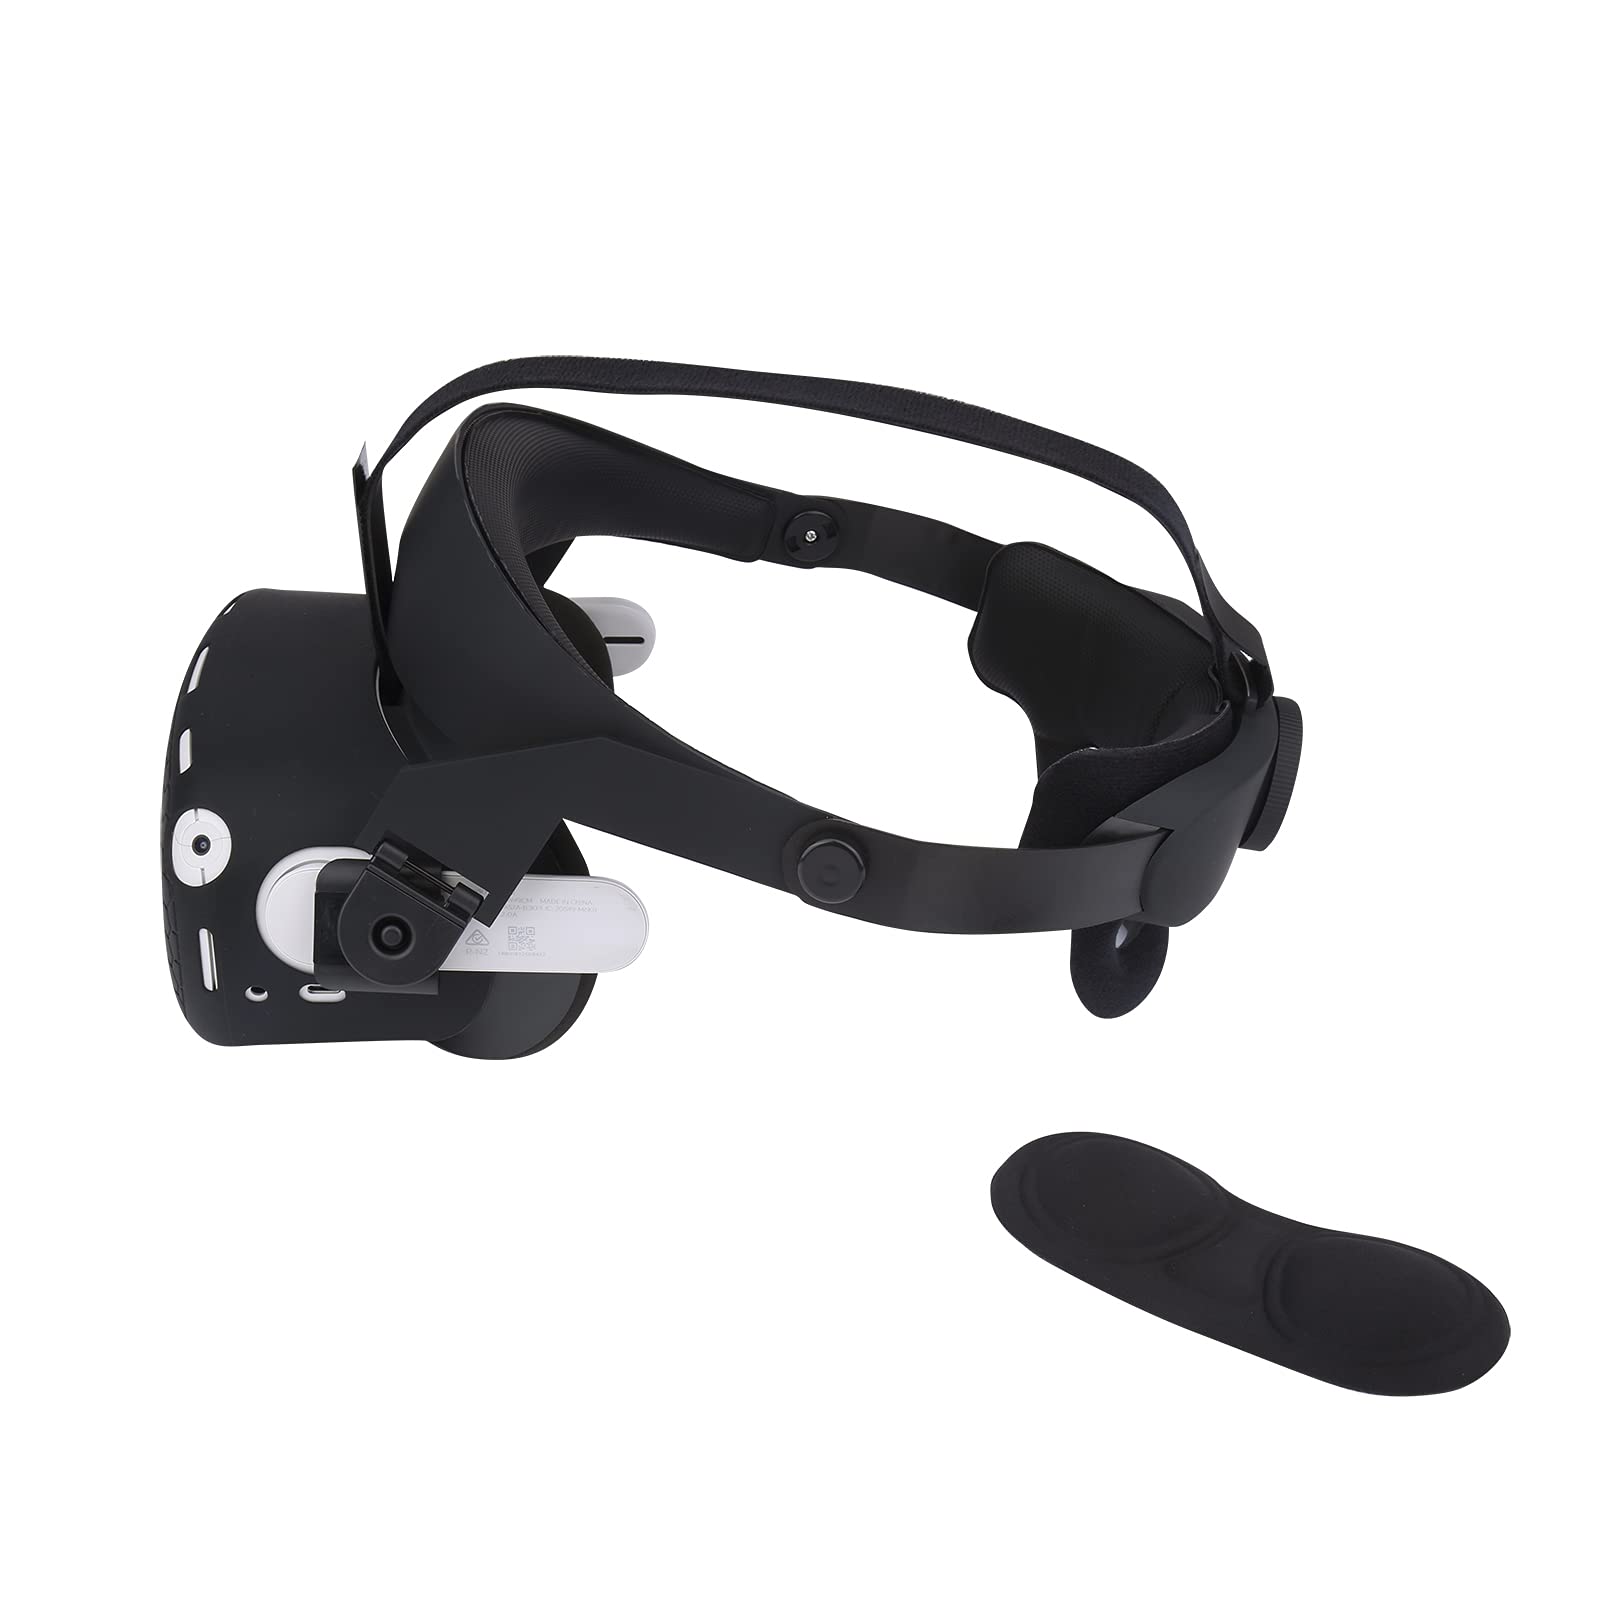 iovroigo adjustable head strap suitable for Oculus quest 2, elite strap replacement ，Enhanced Support and Comfort in VR (Black)